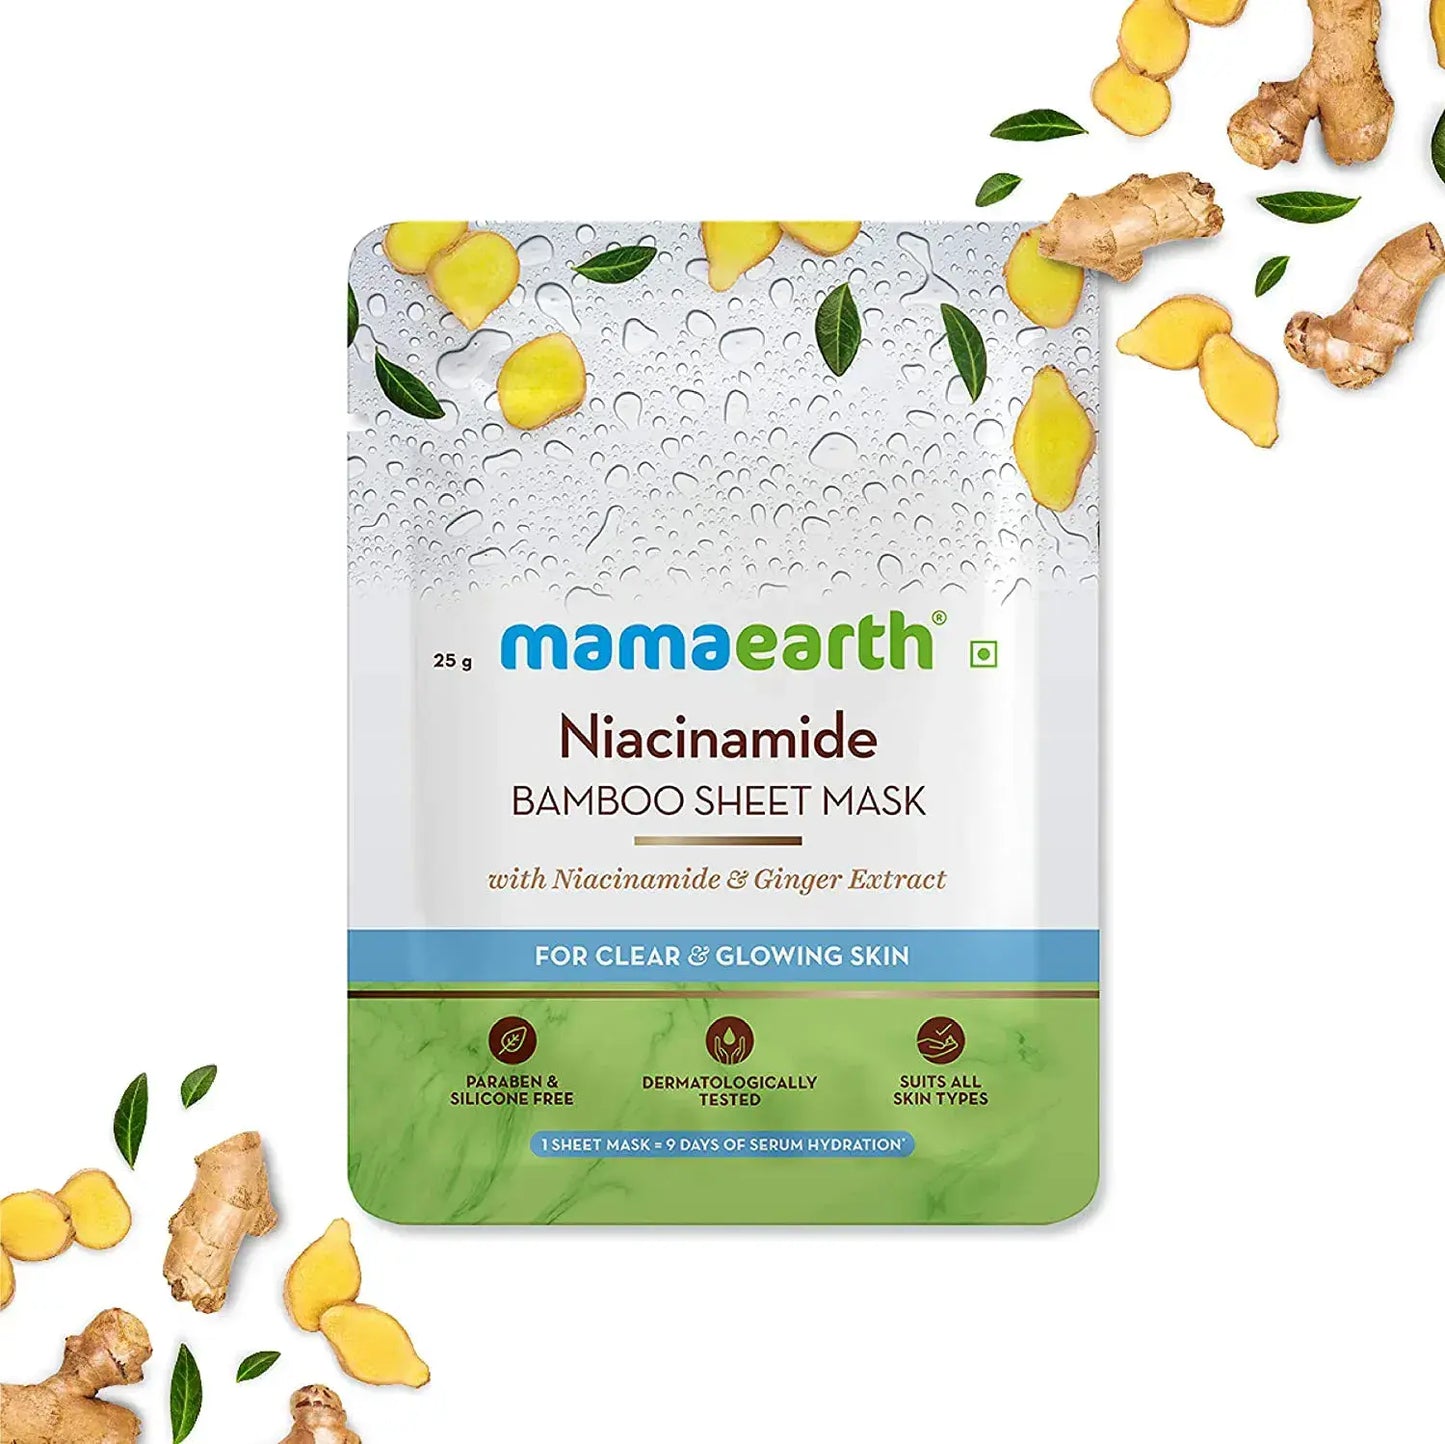 Mamaearth Niacinamide Bamboo Sheet Mask with Ginger extract for clear and glowing skin face mask from mamaearth